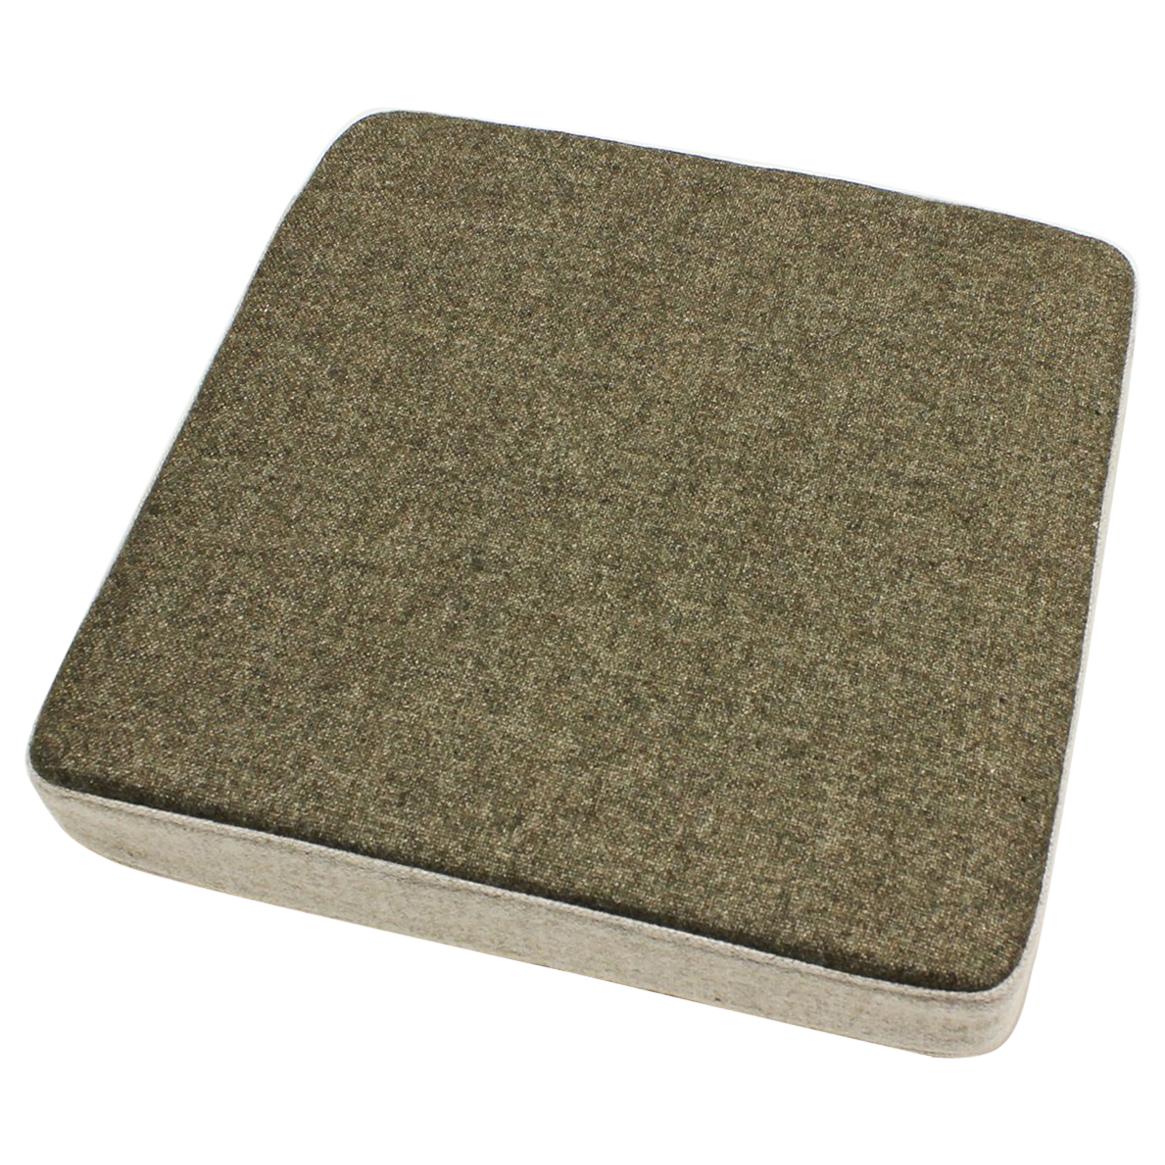 OPE - Ope Select, Cushion/Sound Absorber, Grey